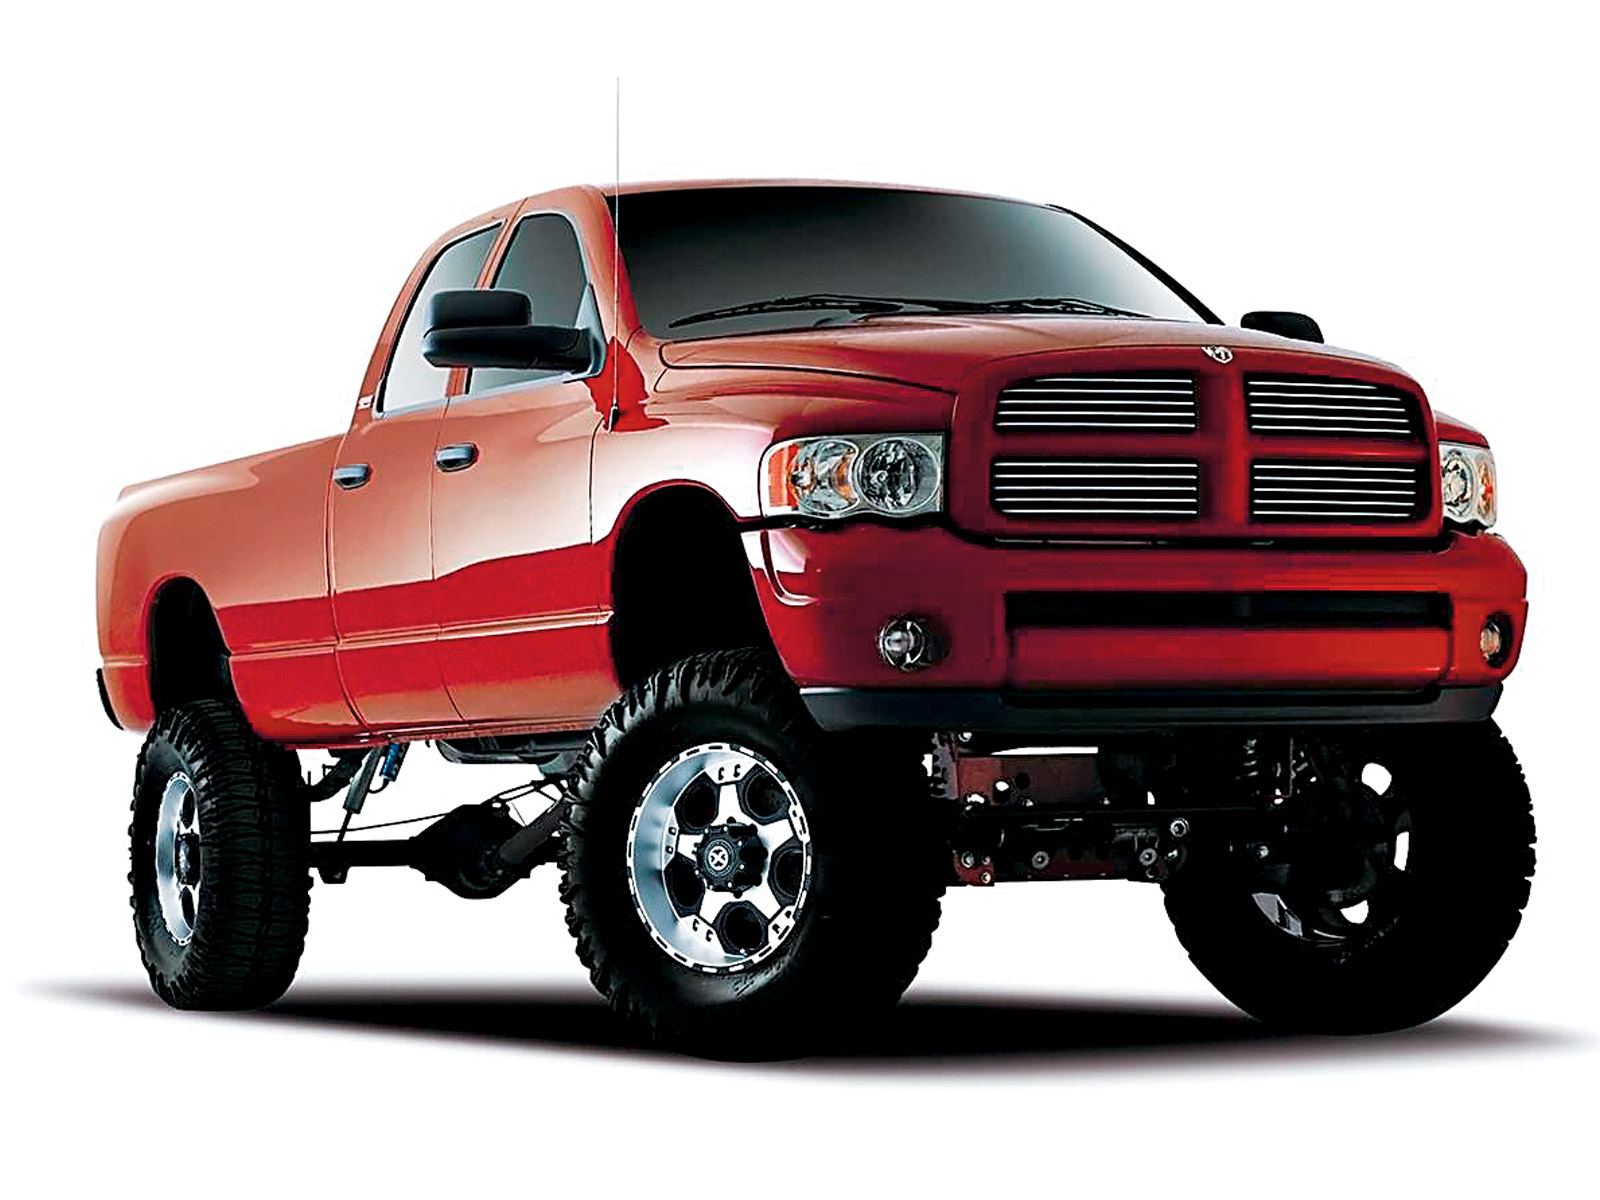 Dodge Truck Wallpaper S High Resolution Image For